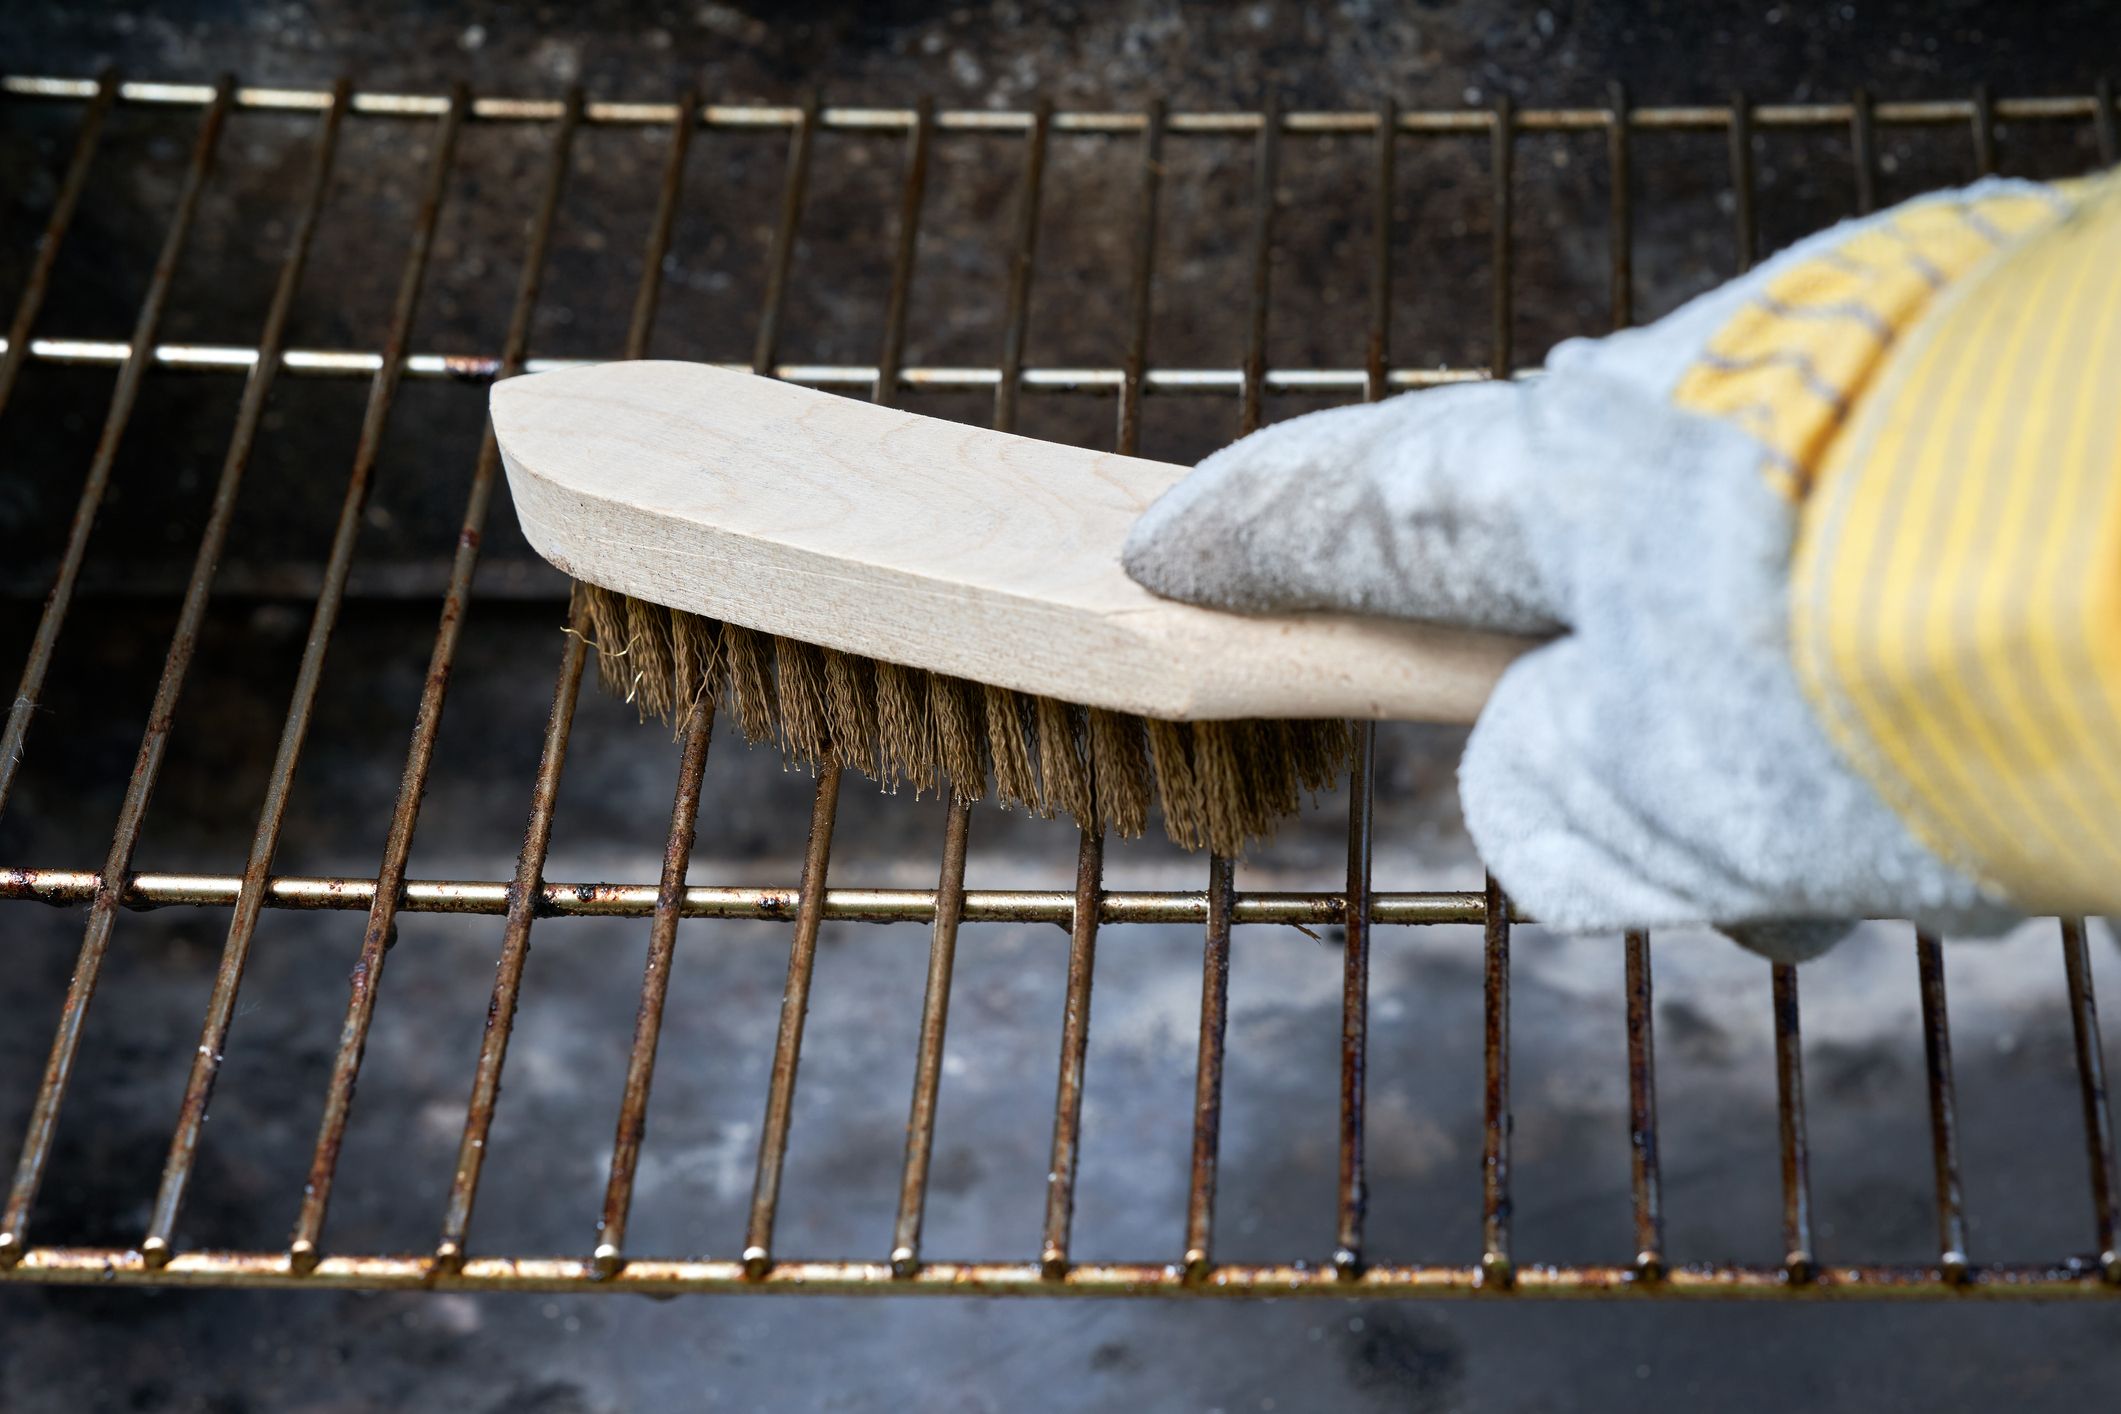 Grill Brush Safety - Are Grill Brushes Safe? - Grill Parts